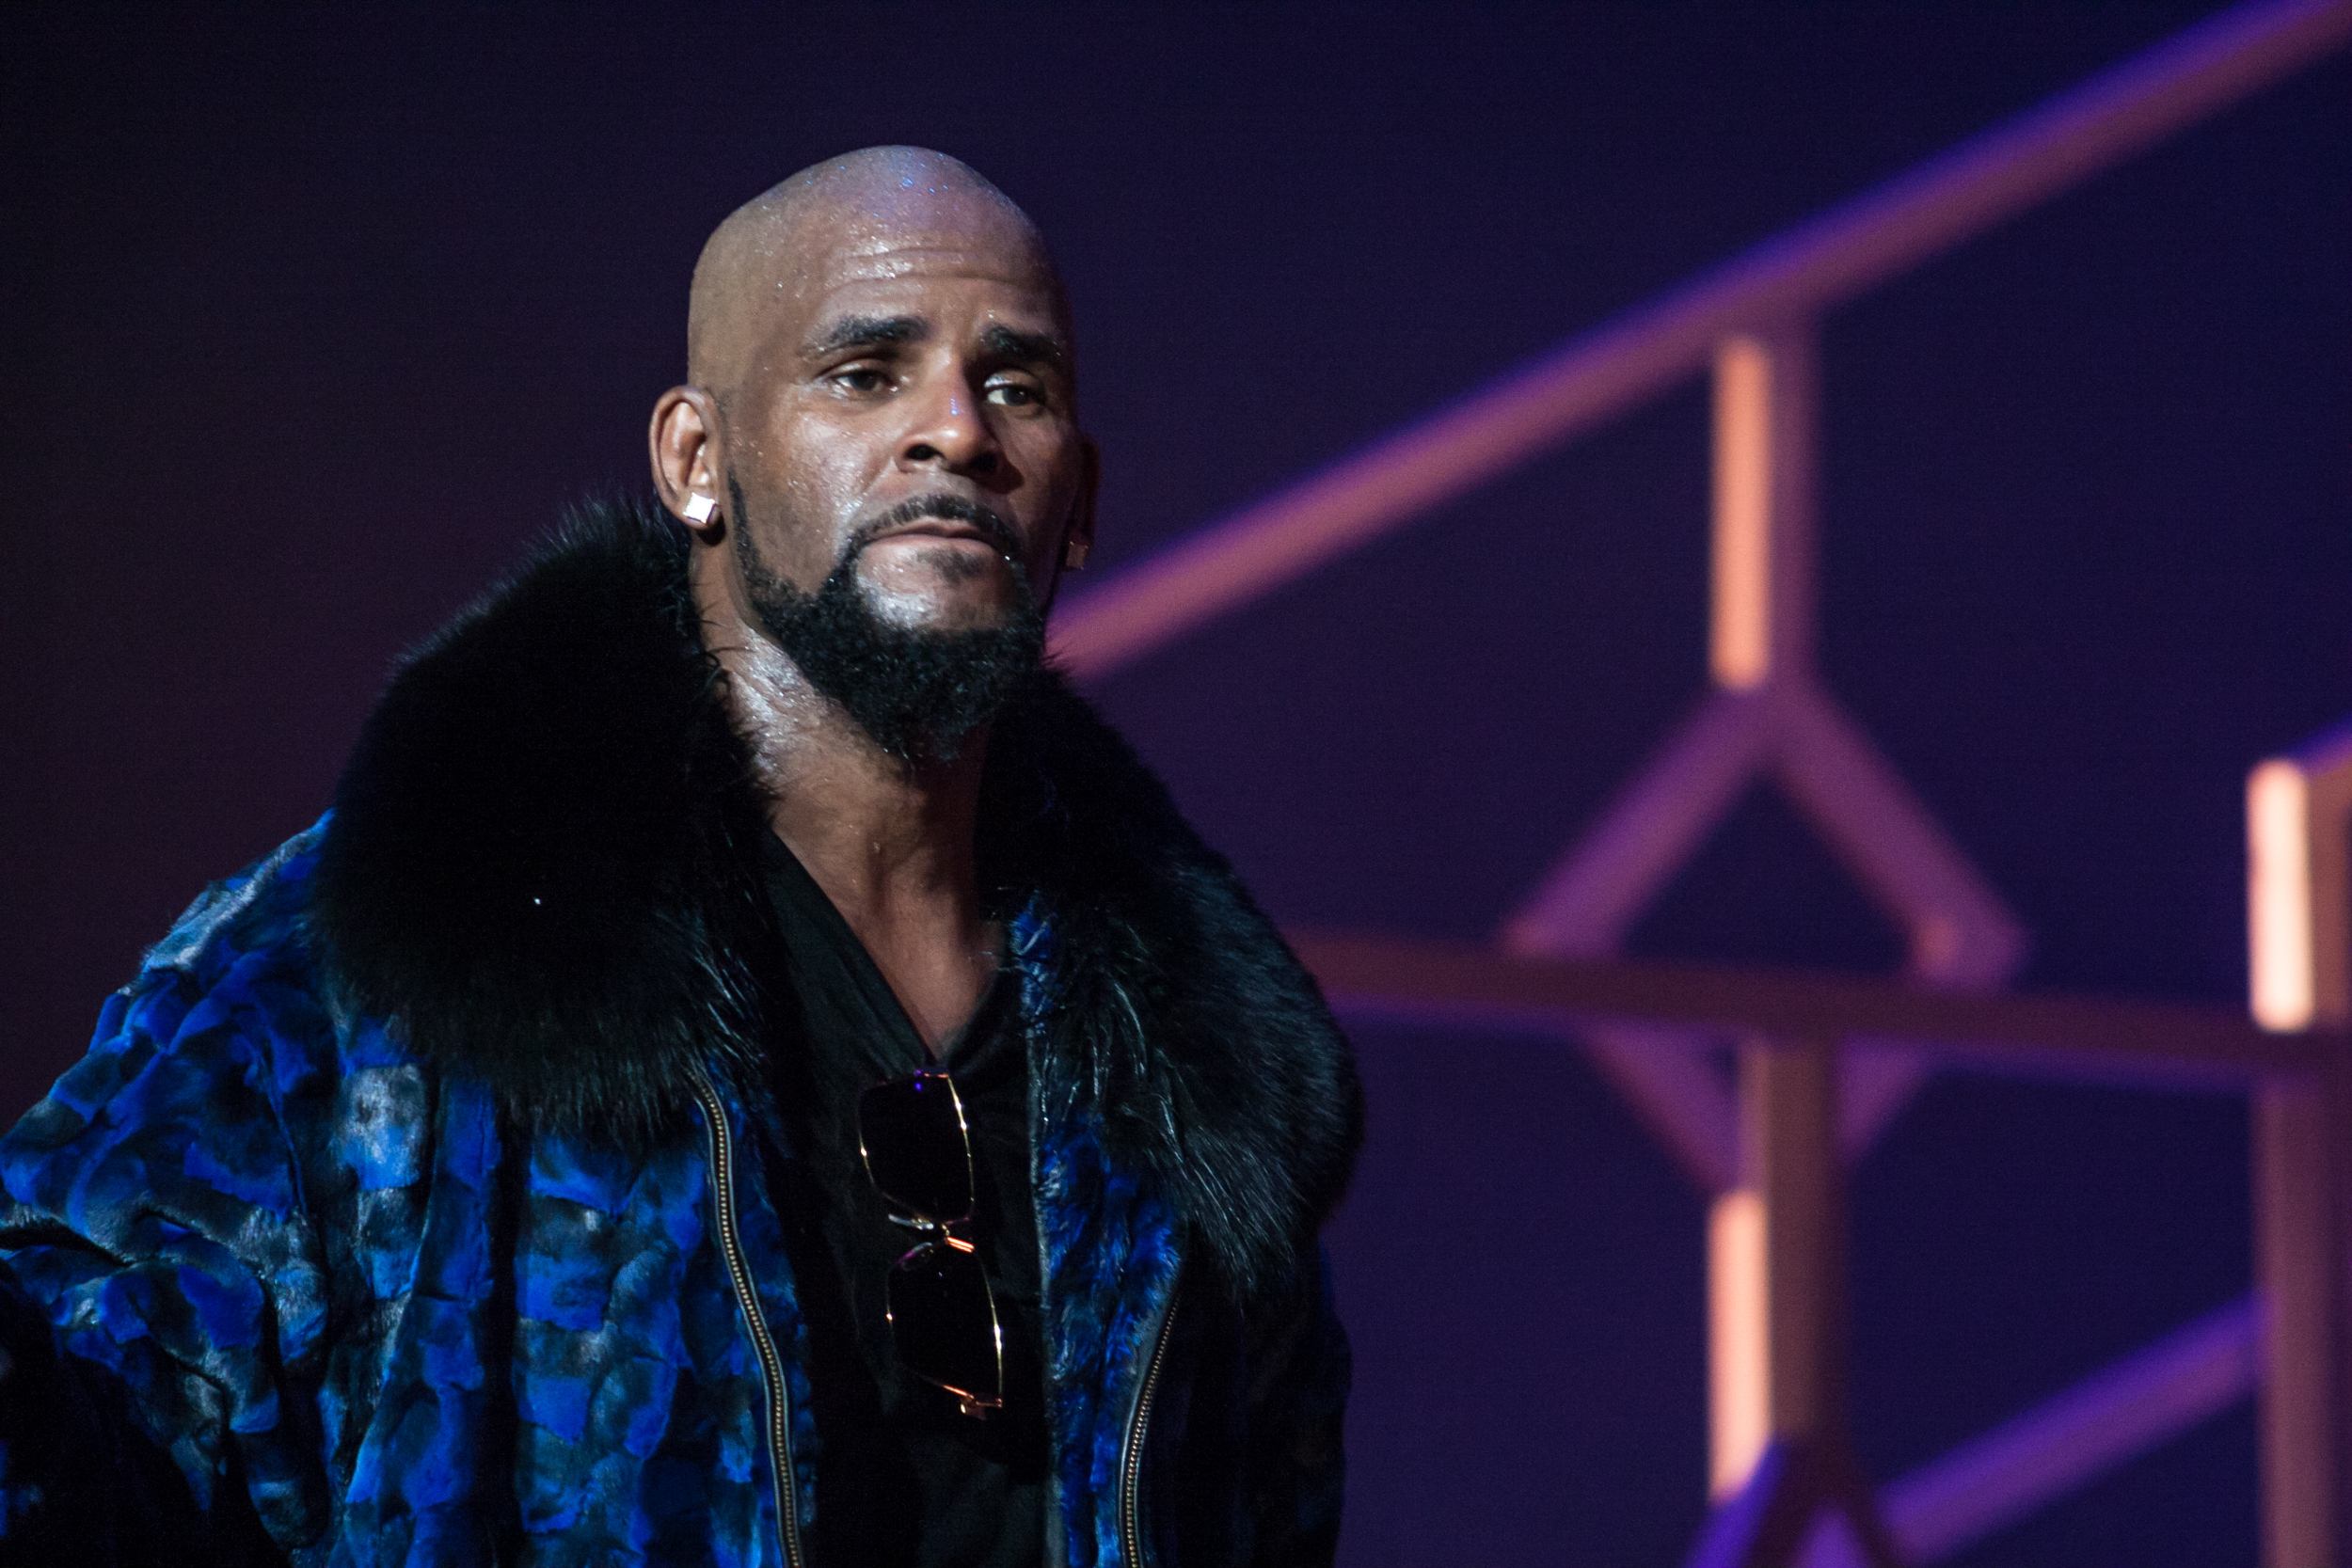 R. Kelly Takes Legal Action Against Bureau of Prisons for Private Data Leaks - Inmate Lookup